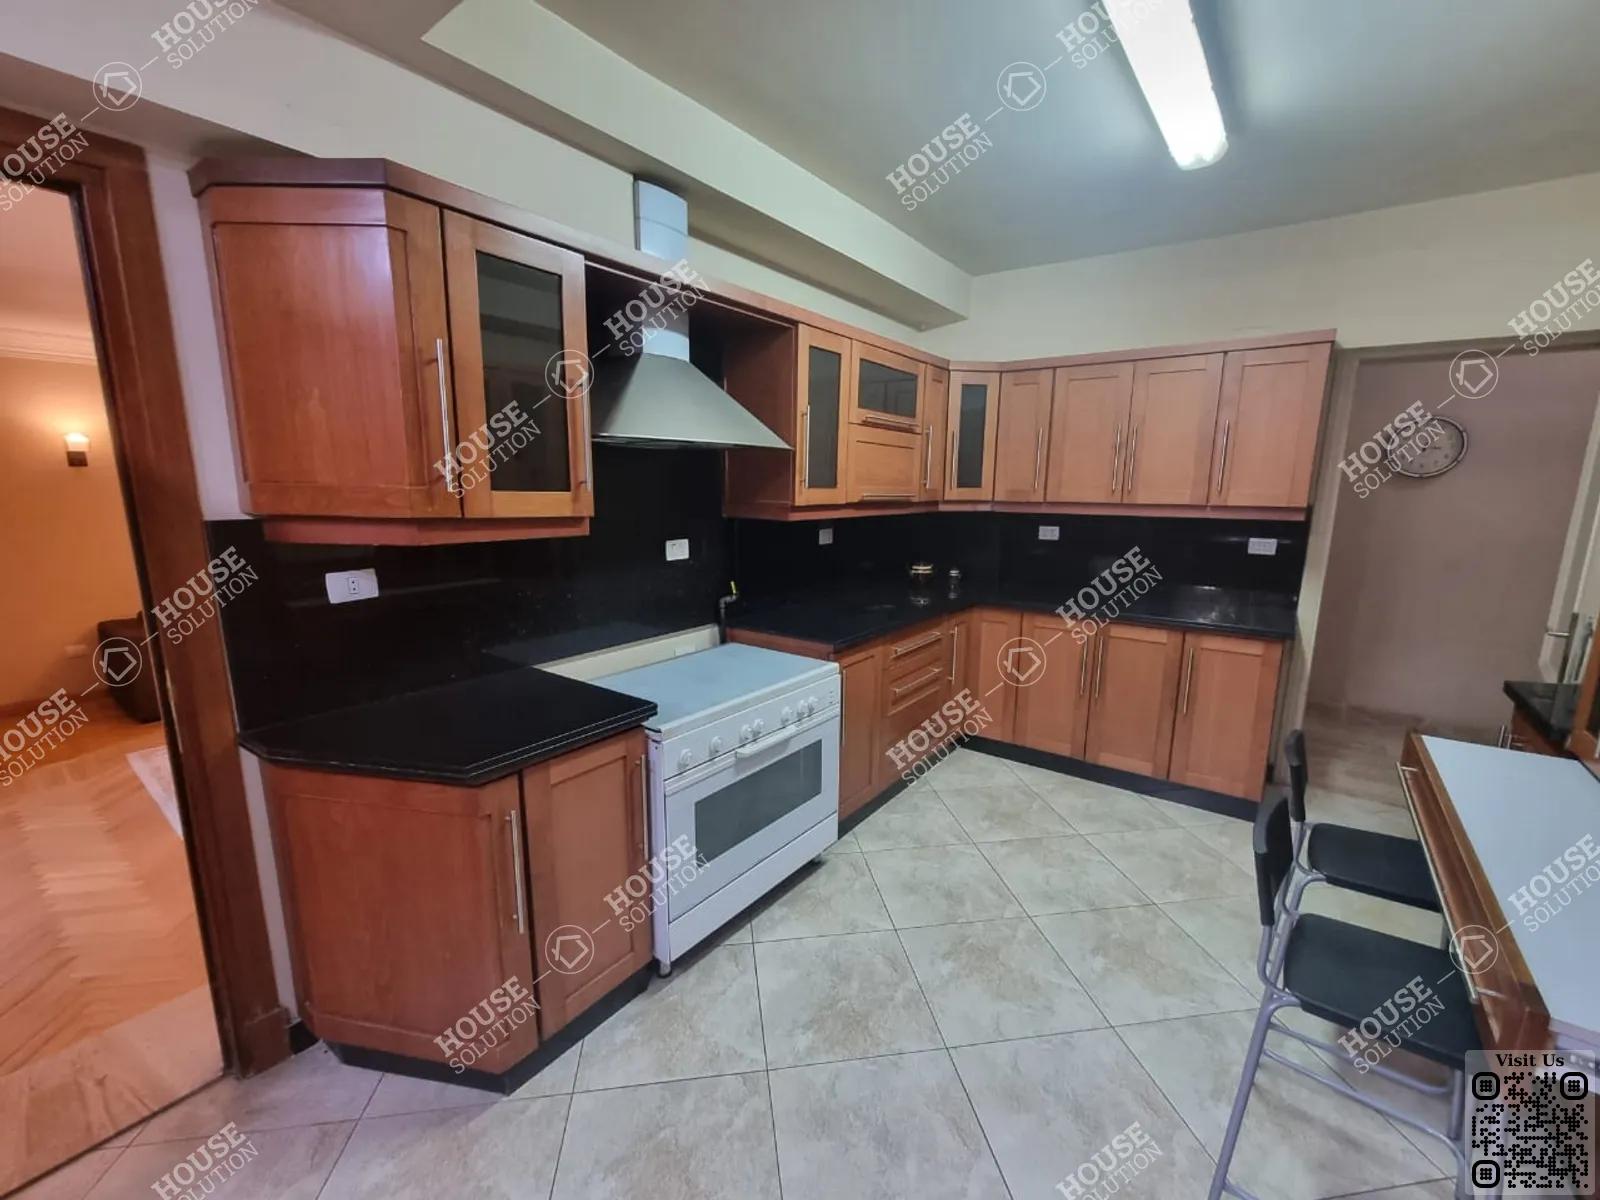 KITCHEN  @ Apartments For Rent In Maadi Maadi Sarayat Area: 241 m² consists of 3 Bedrooms 3 Bathrooms Modern furnished 5 stars #5411-1